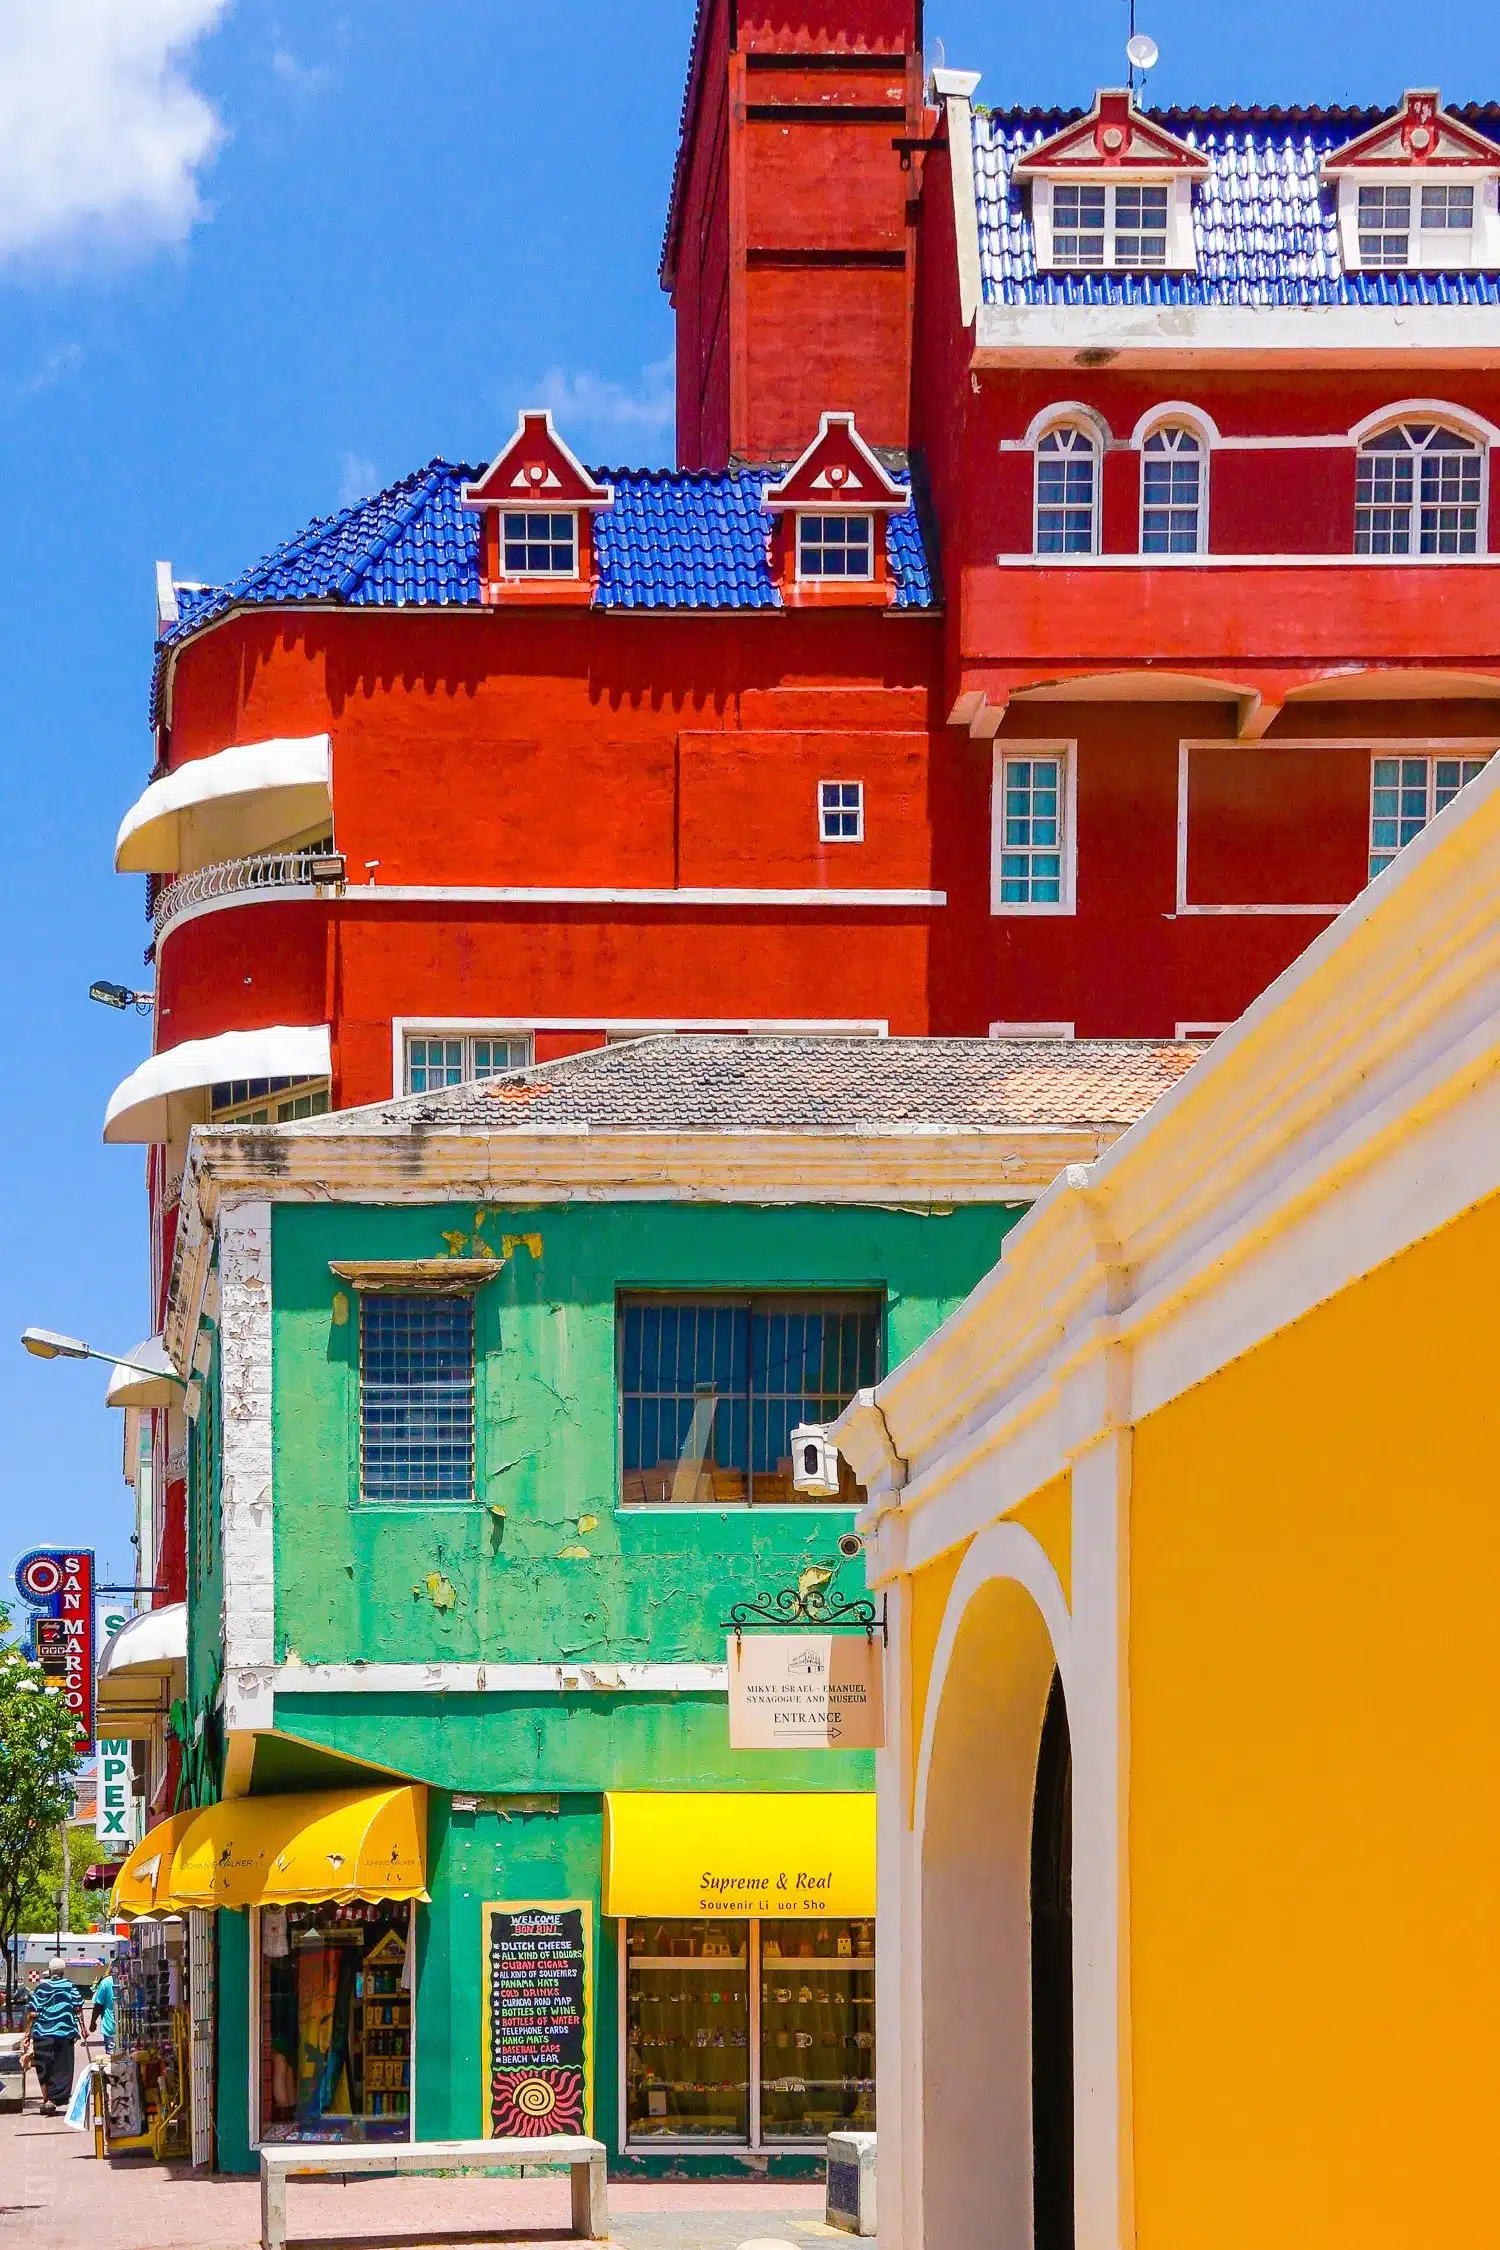 What to do in Curacao: 10 Tips on the beautiful Caribbean island, perfect for vacation travel, good food and hotels, and a fun trip, as seen in gorgeous photos! The oldest synagogue in the Americas is in Curaçao!